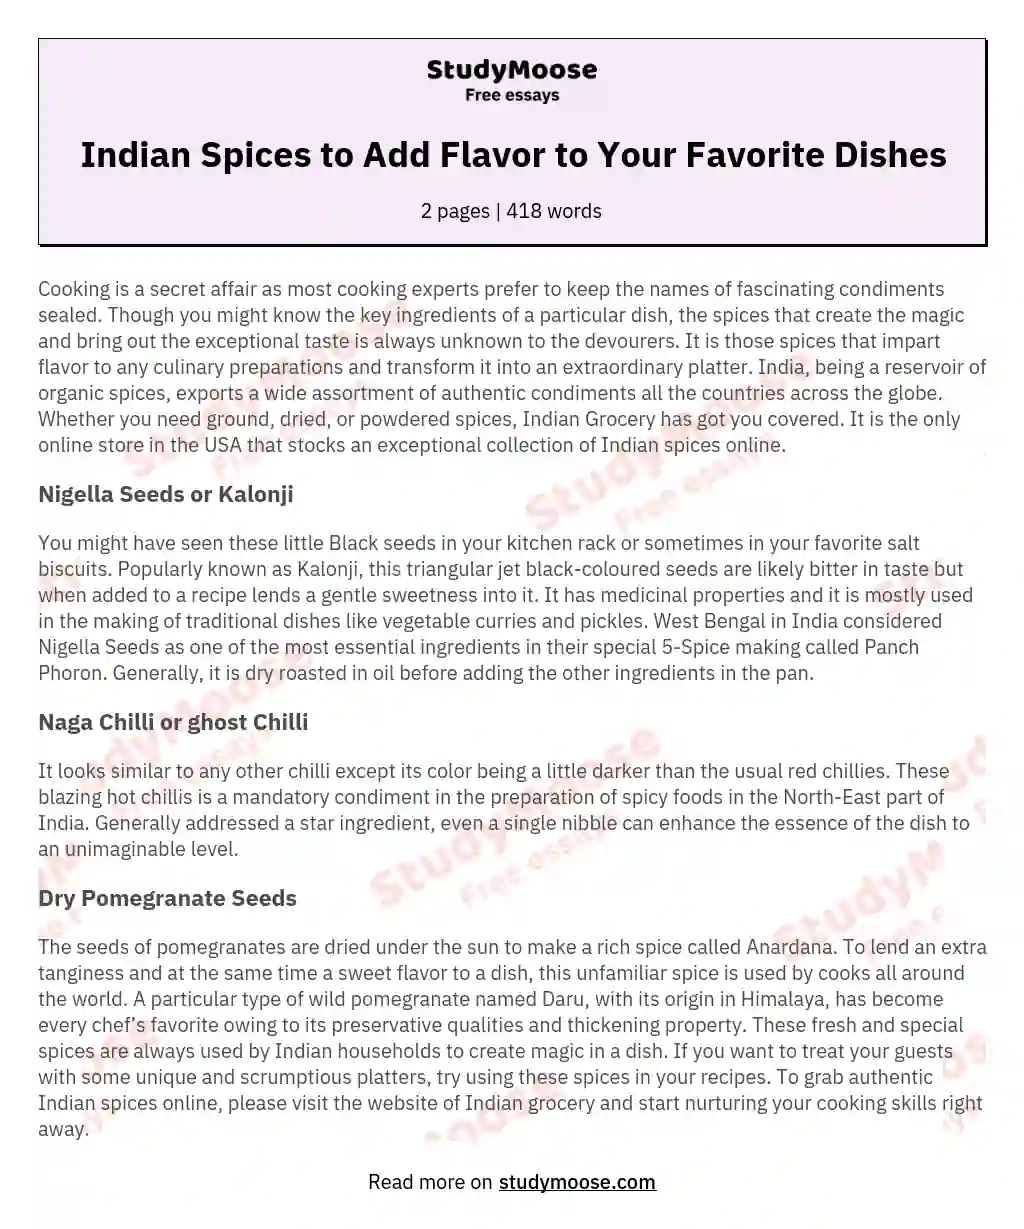 Indian Spices to Add Flavor to Your Favorite Dishes essay